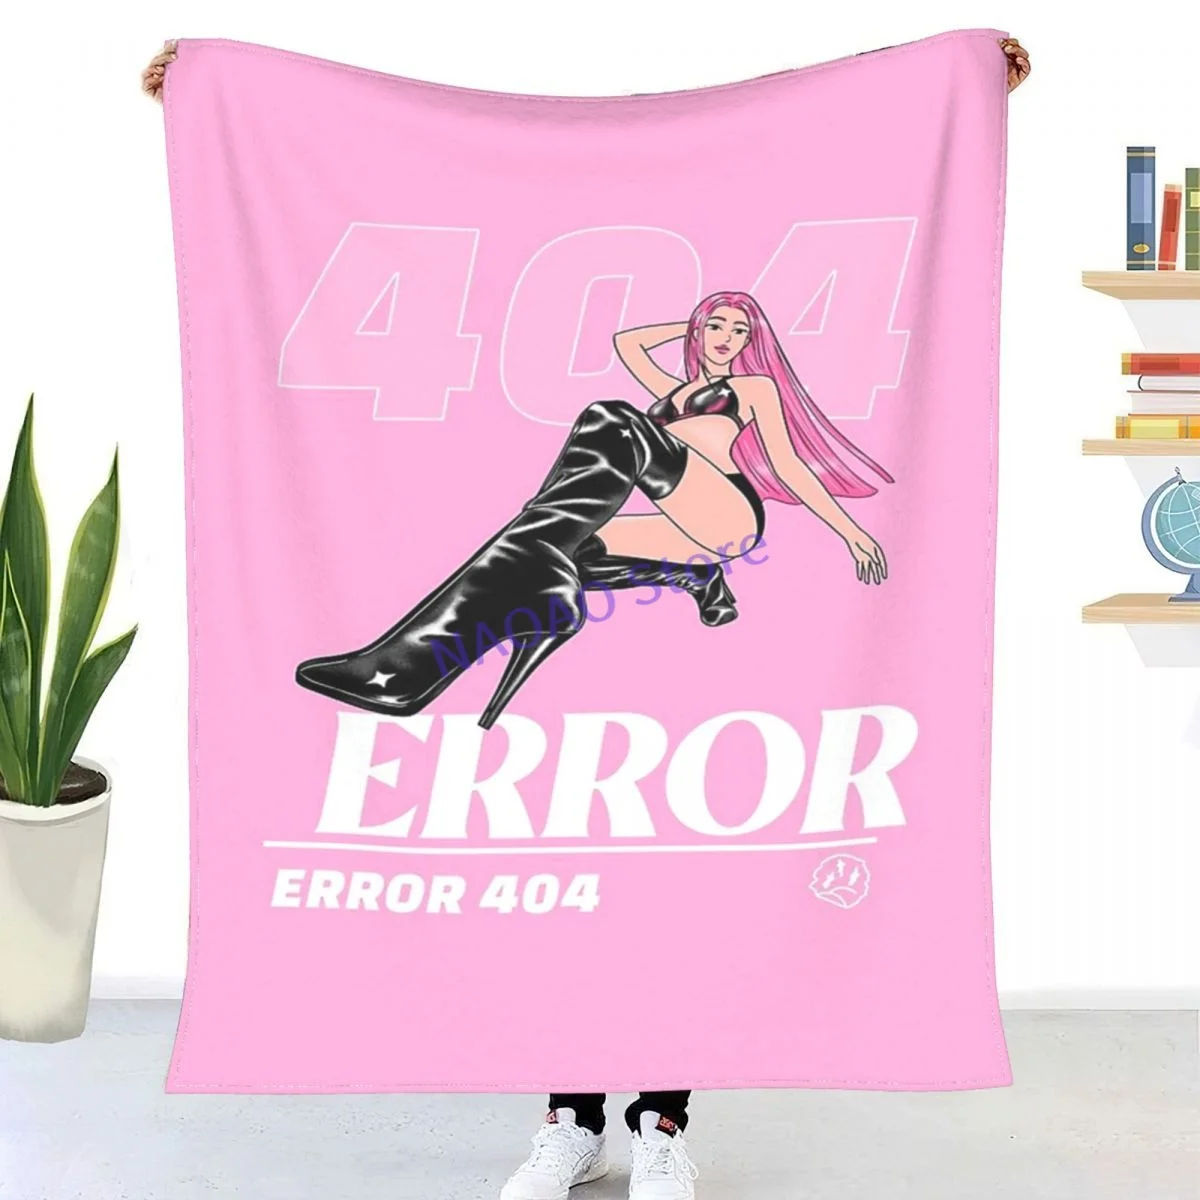 

Anime Cyberpunk Female Throw Blanket Sheets on the bed Blankets on the sofa Decorative lattice bedspreads Happy nap for children